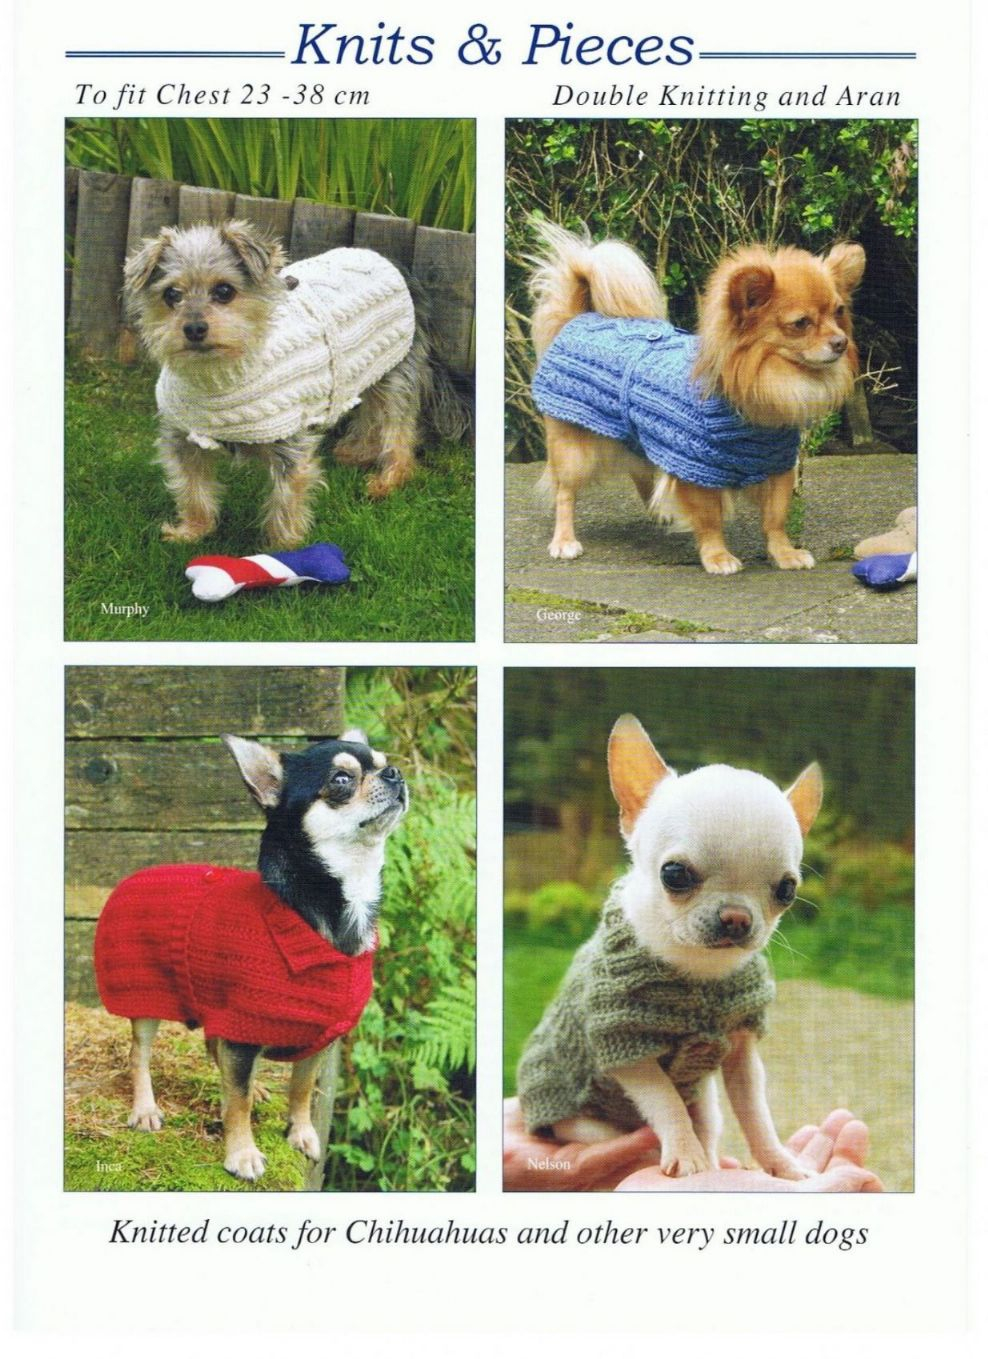 Small Dog Knitting Patterns Knitting Pattern For Knitted Dog Coat Sweater Very Small Dogs Chihuahuas Dk Aran